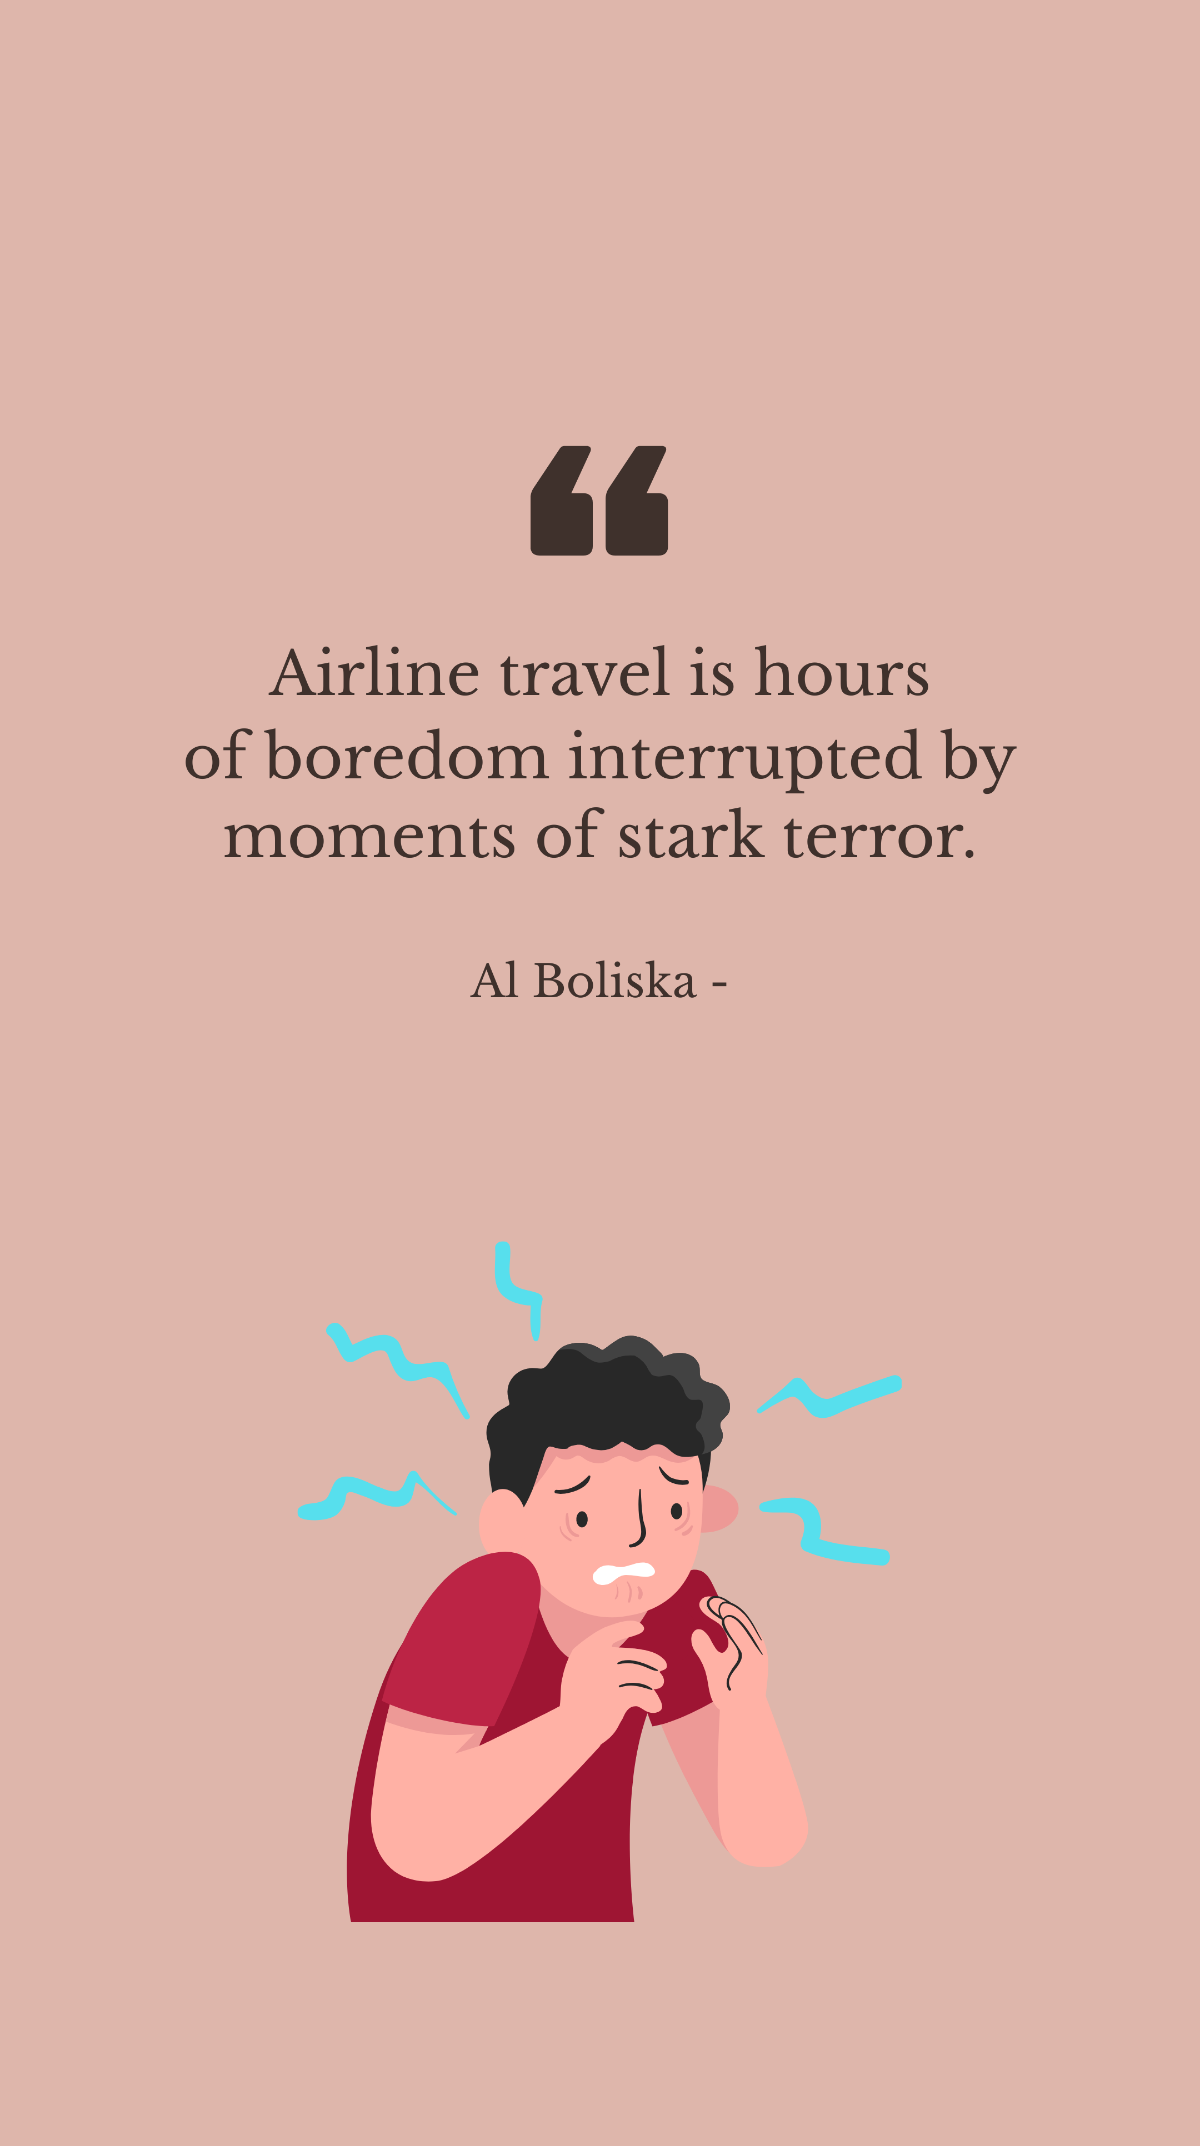 Free Al Boliska - Airline travel is hours of boredom interrupted by moments of stark terror. Template